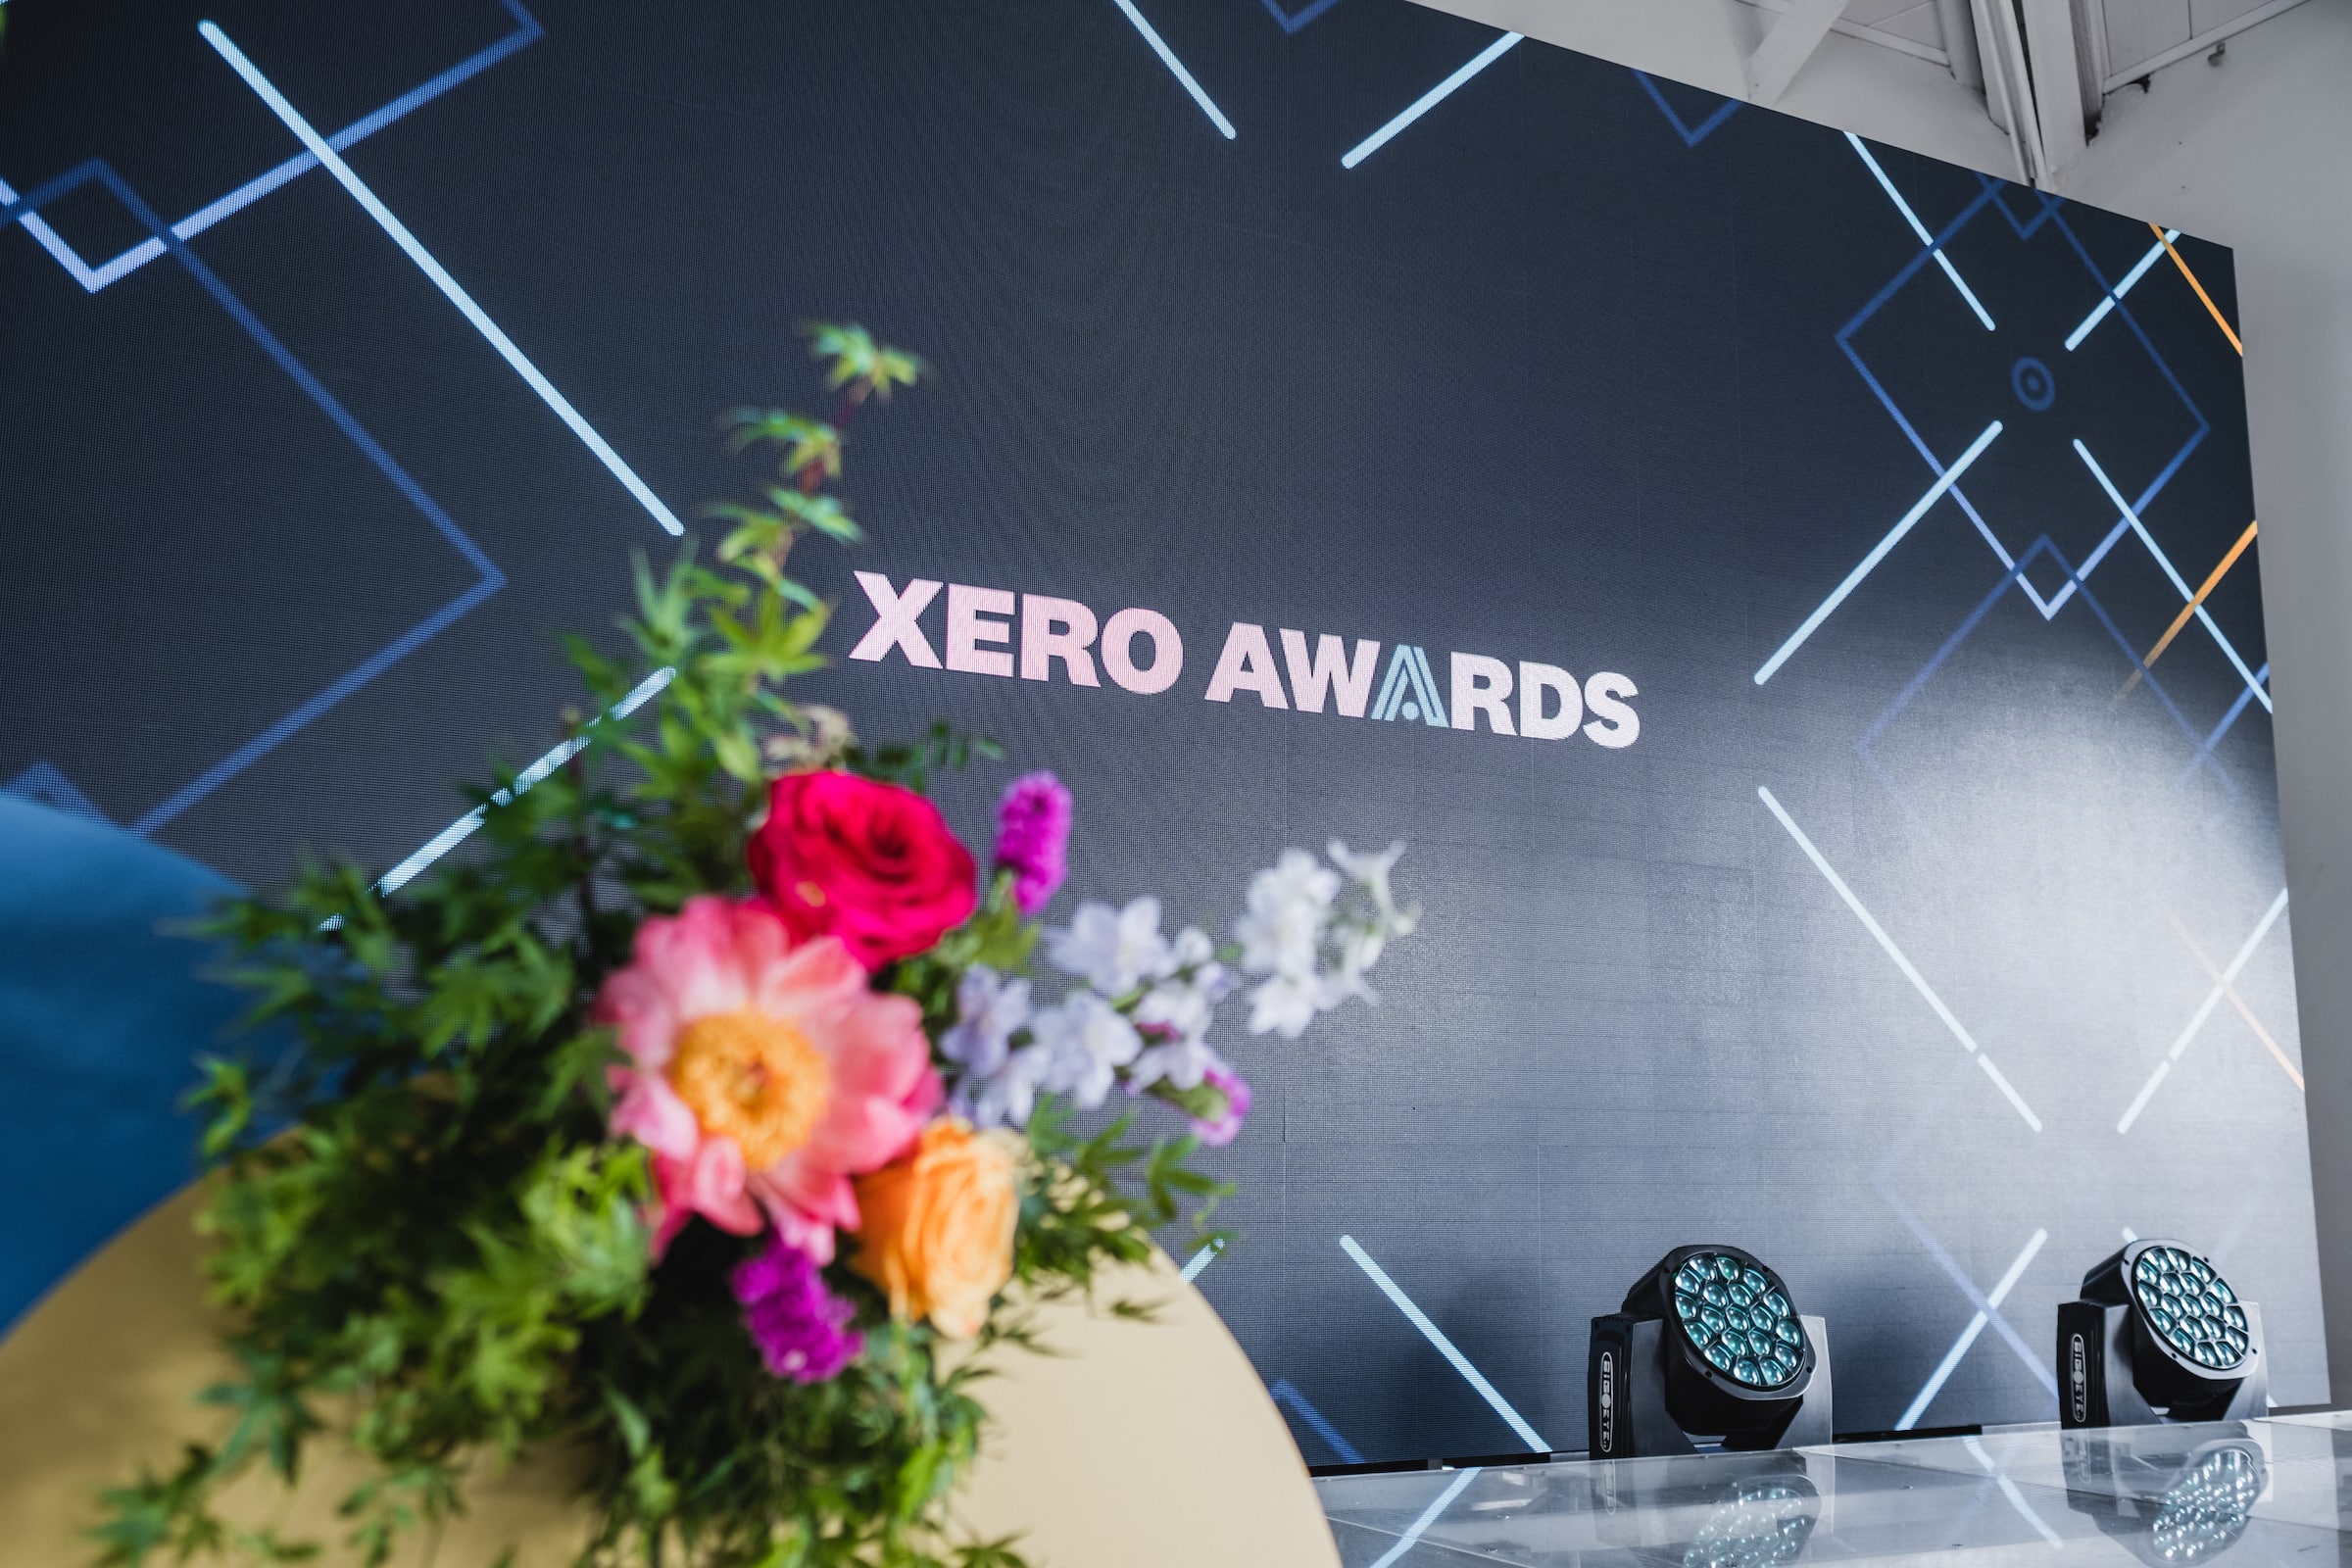 Image of Xero Awards stage with flowers